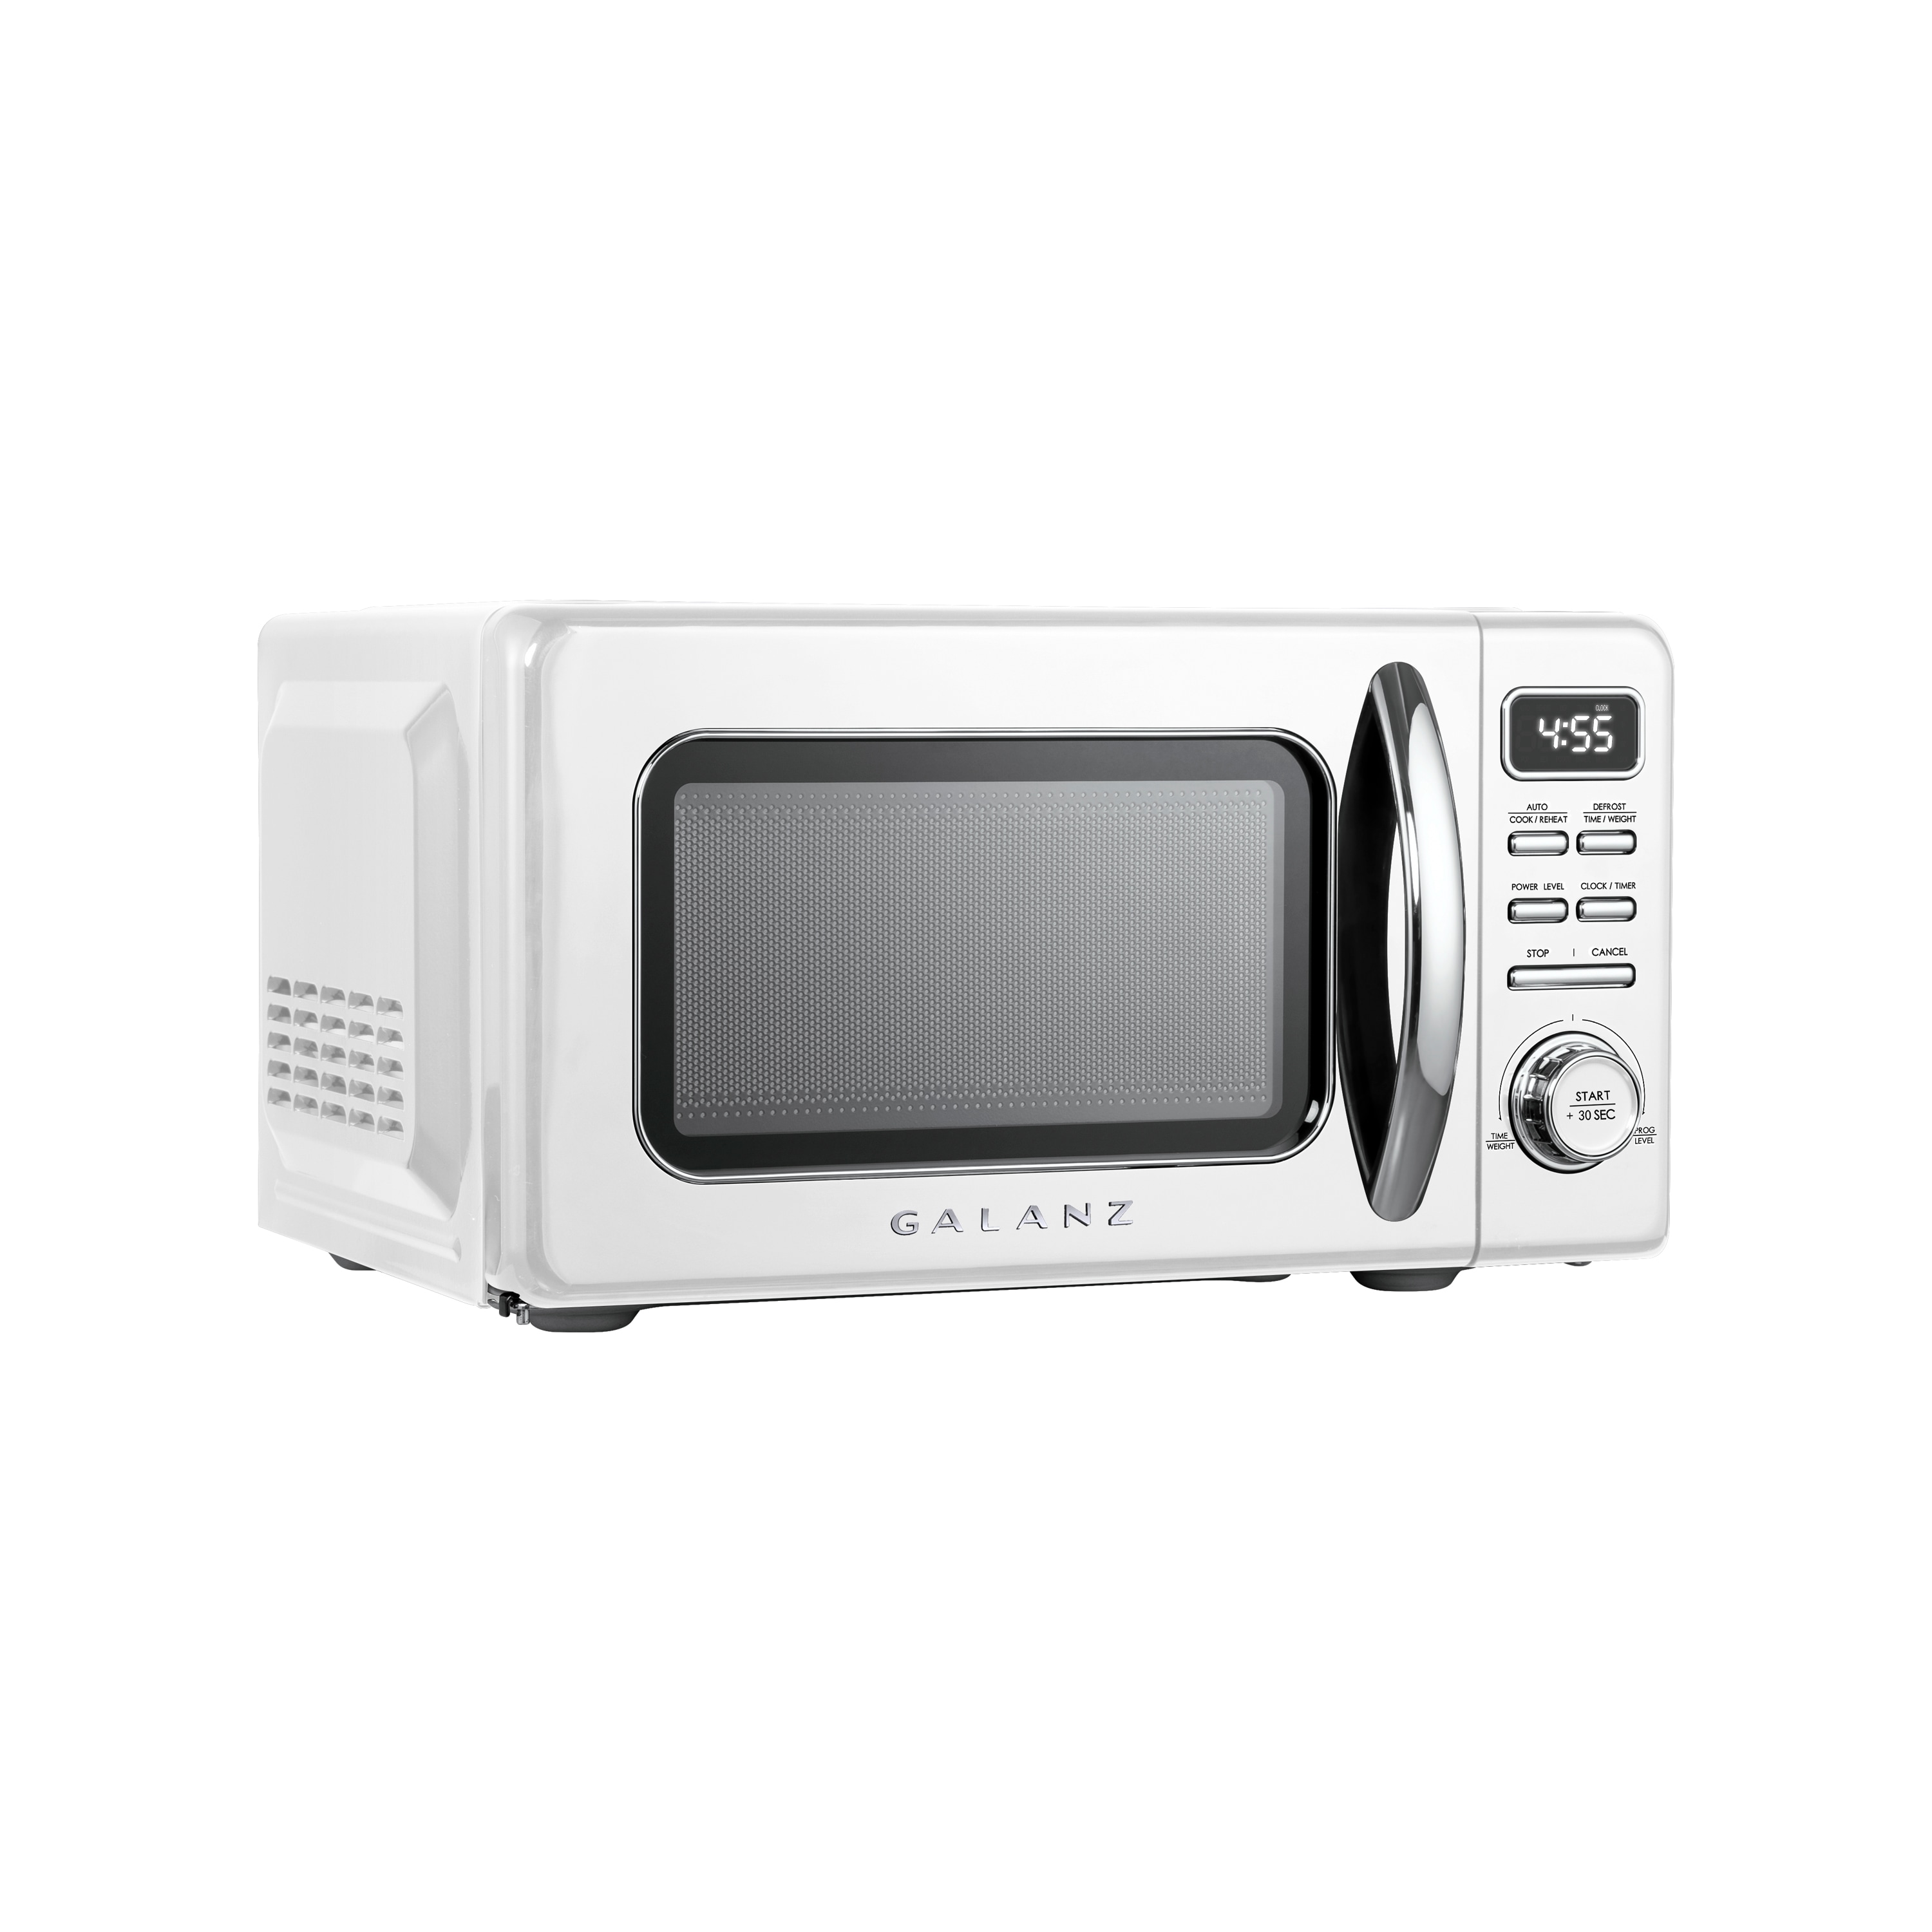 Galanz 0.7 cu. ft. Retro Countertop Microwave Oven, 700 Watts, Cream, for  Sale in Dade City, FL - OfferUp